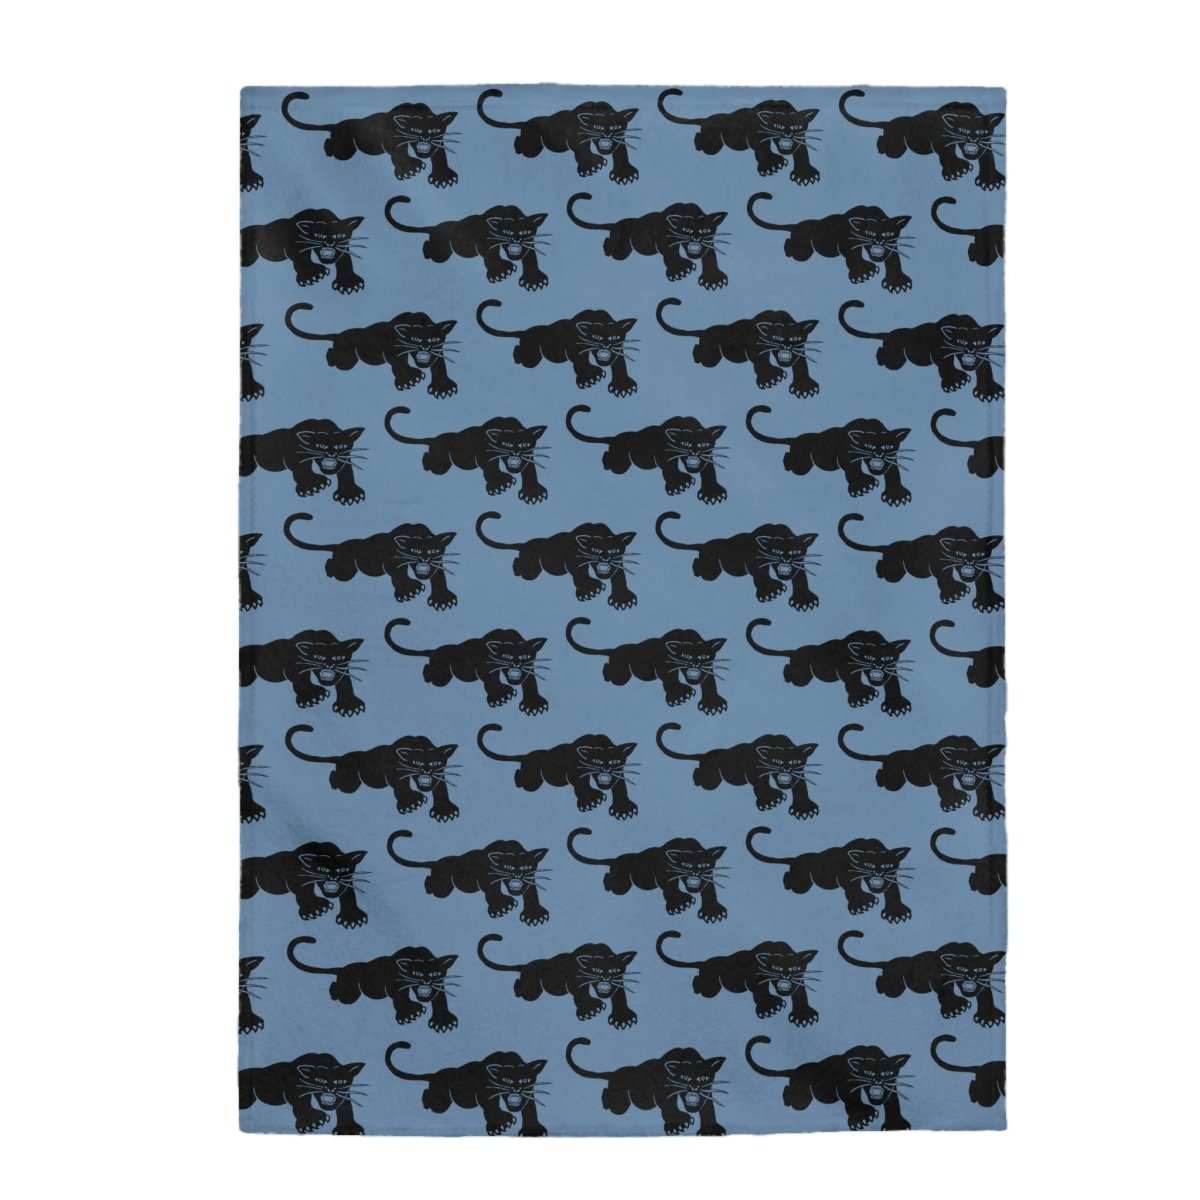 Panther Party Throw Blanket - The Trini Gee